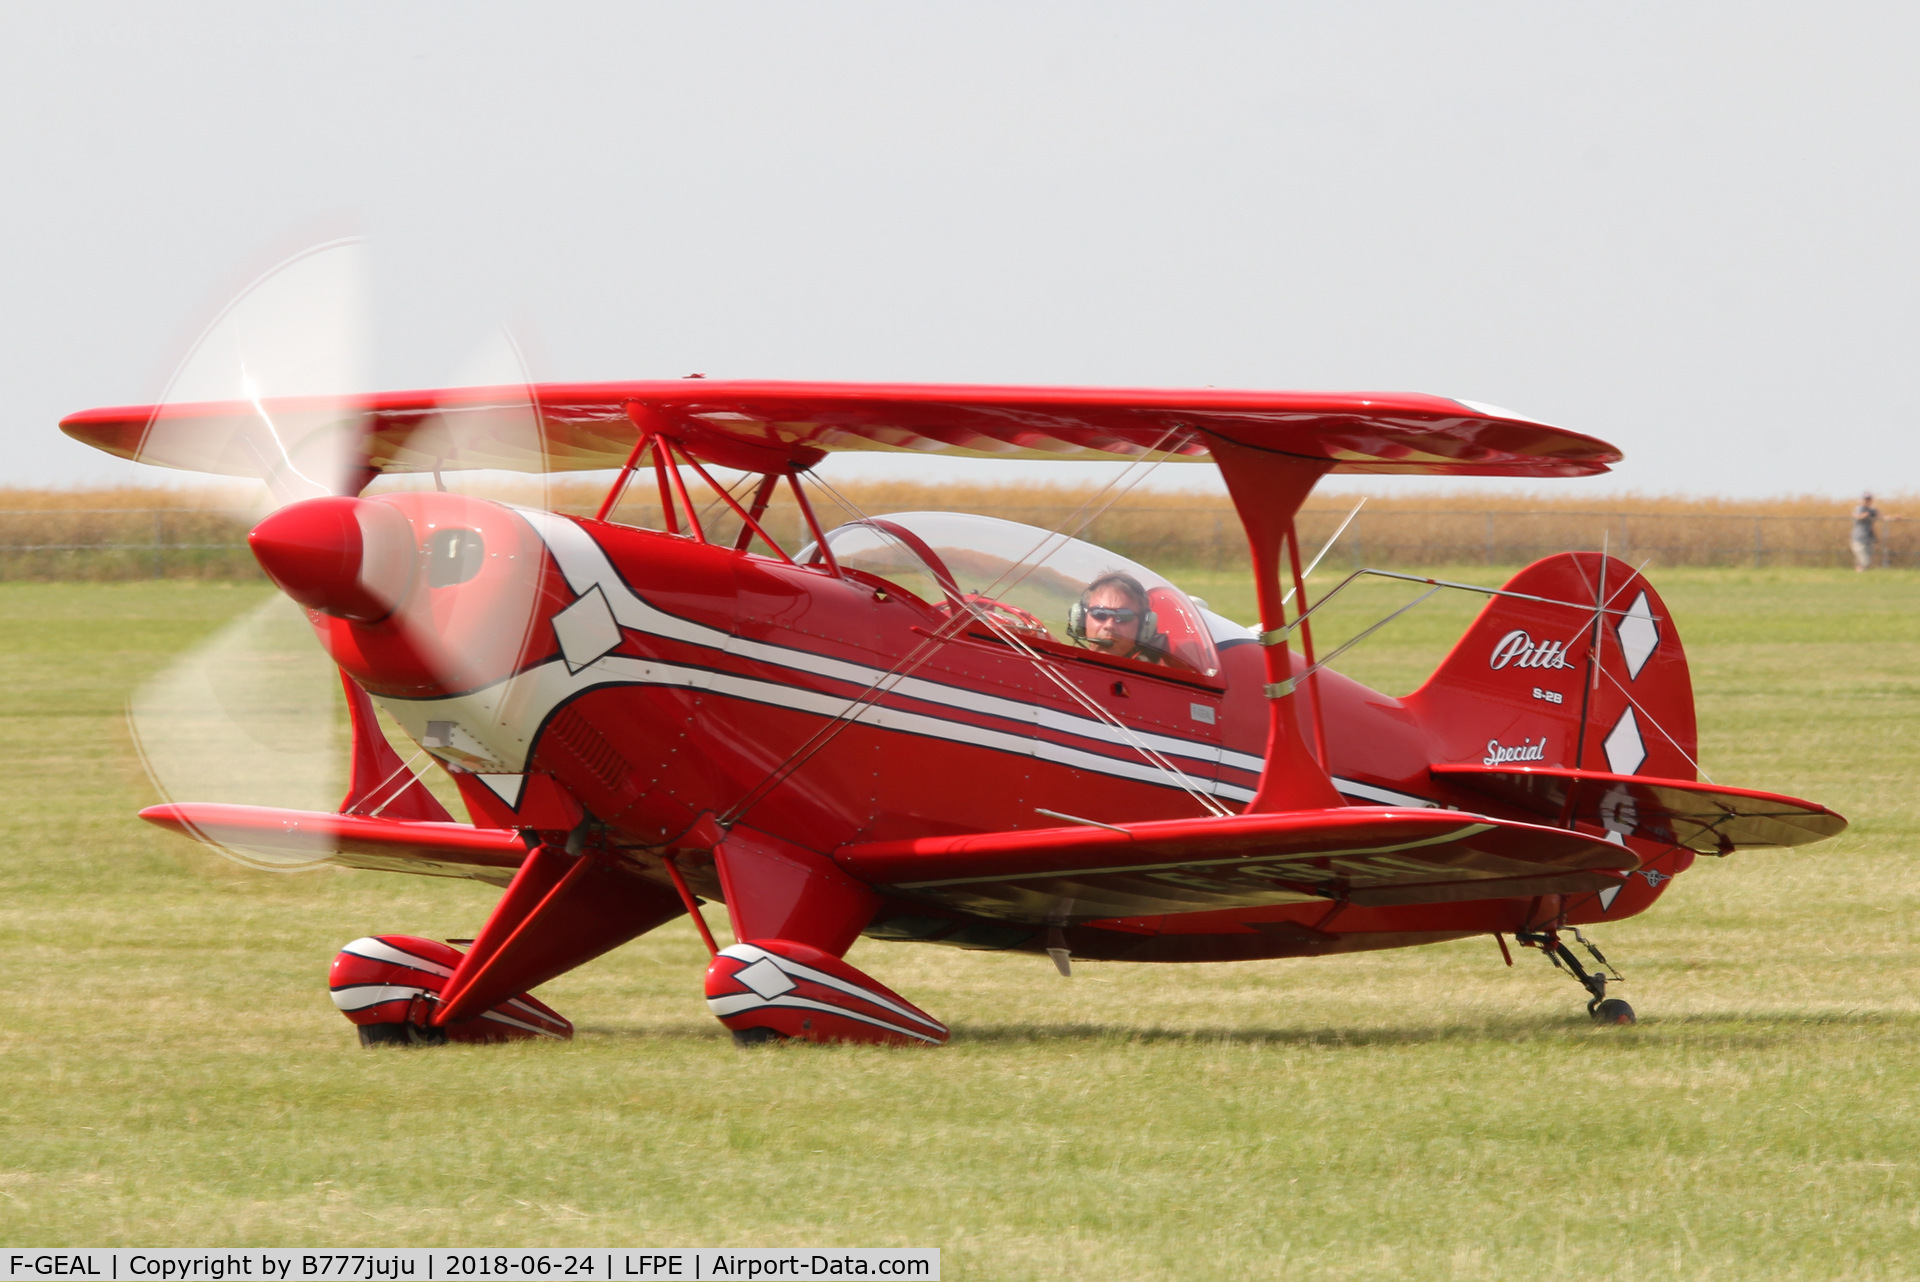 F-GEAL, Christen Pitts S-2B Special C/N 5197, at Meaux Airshow